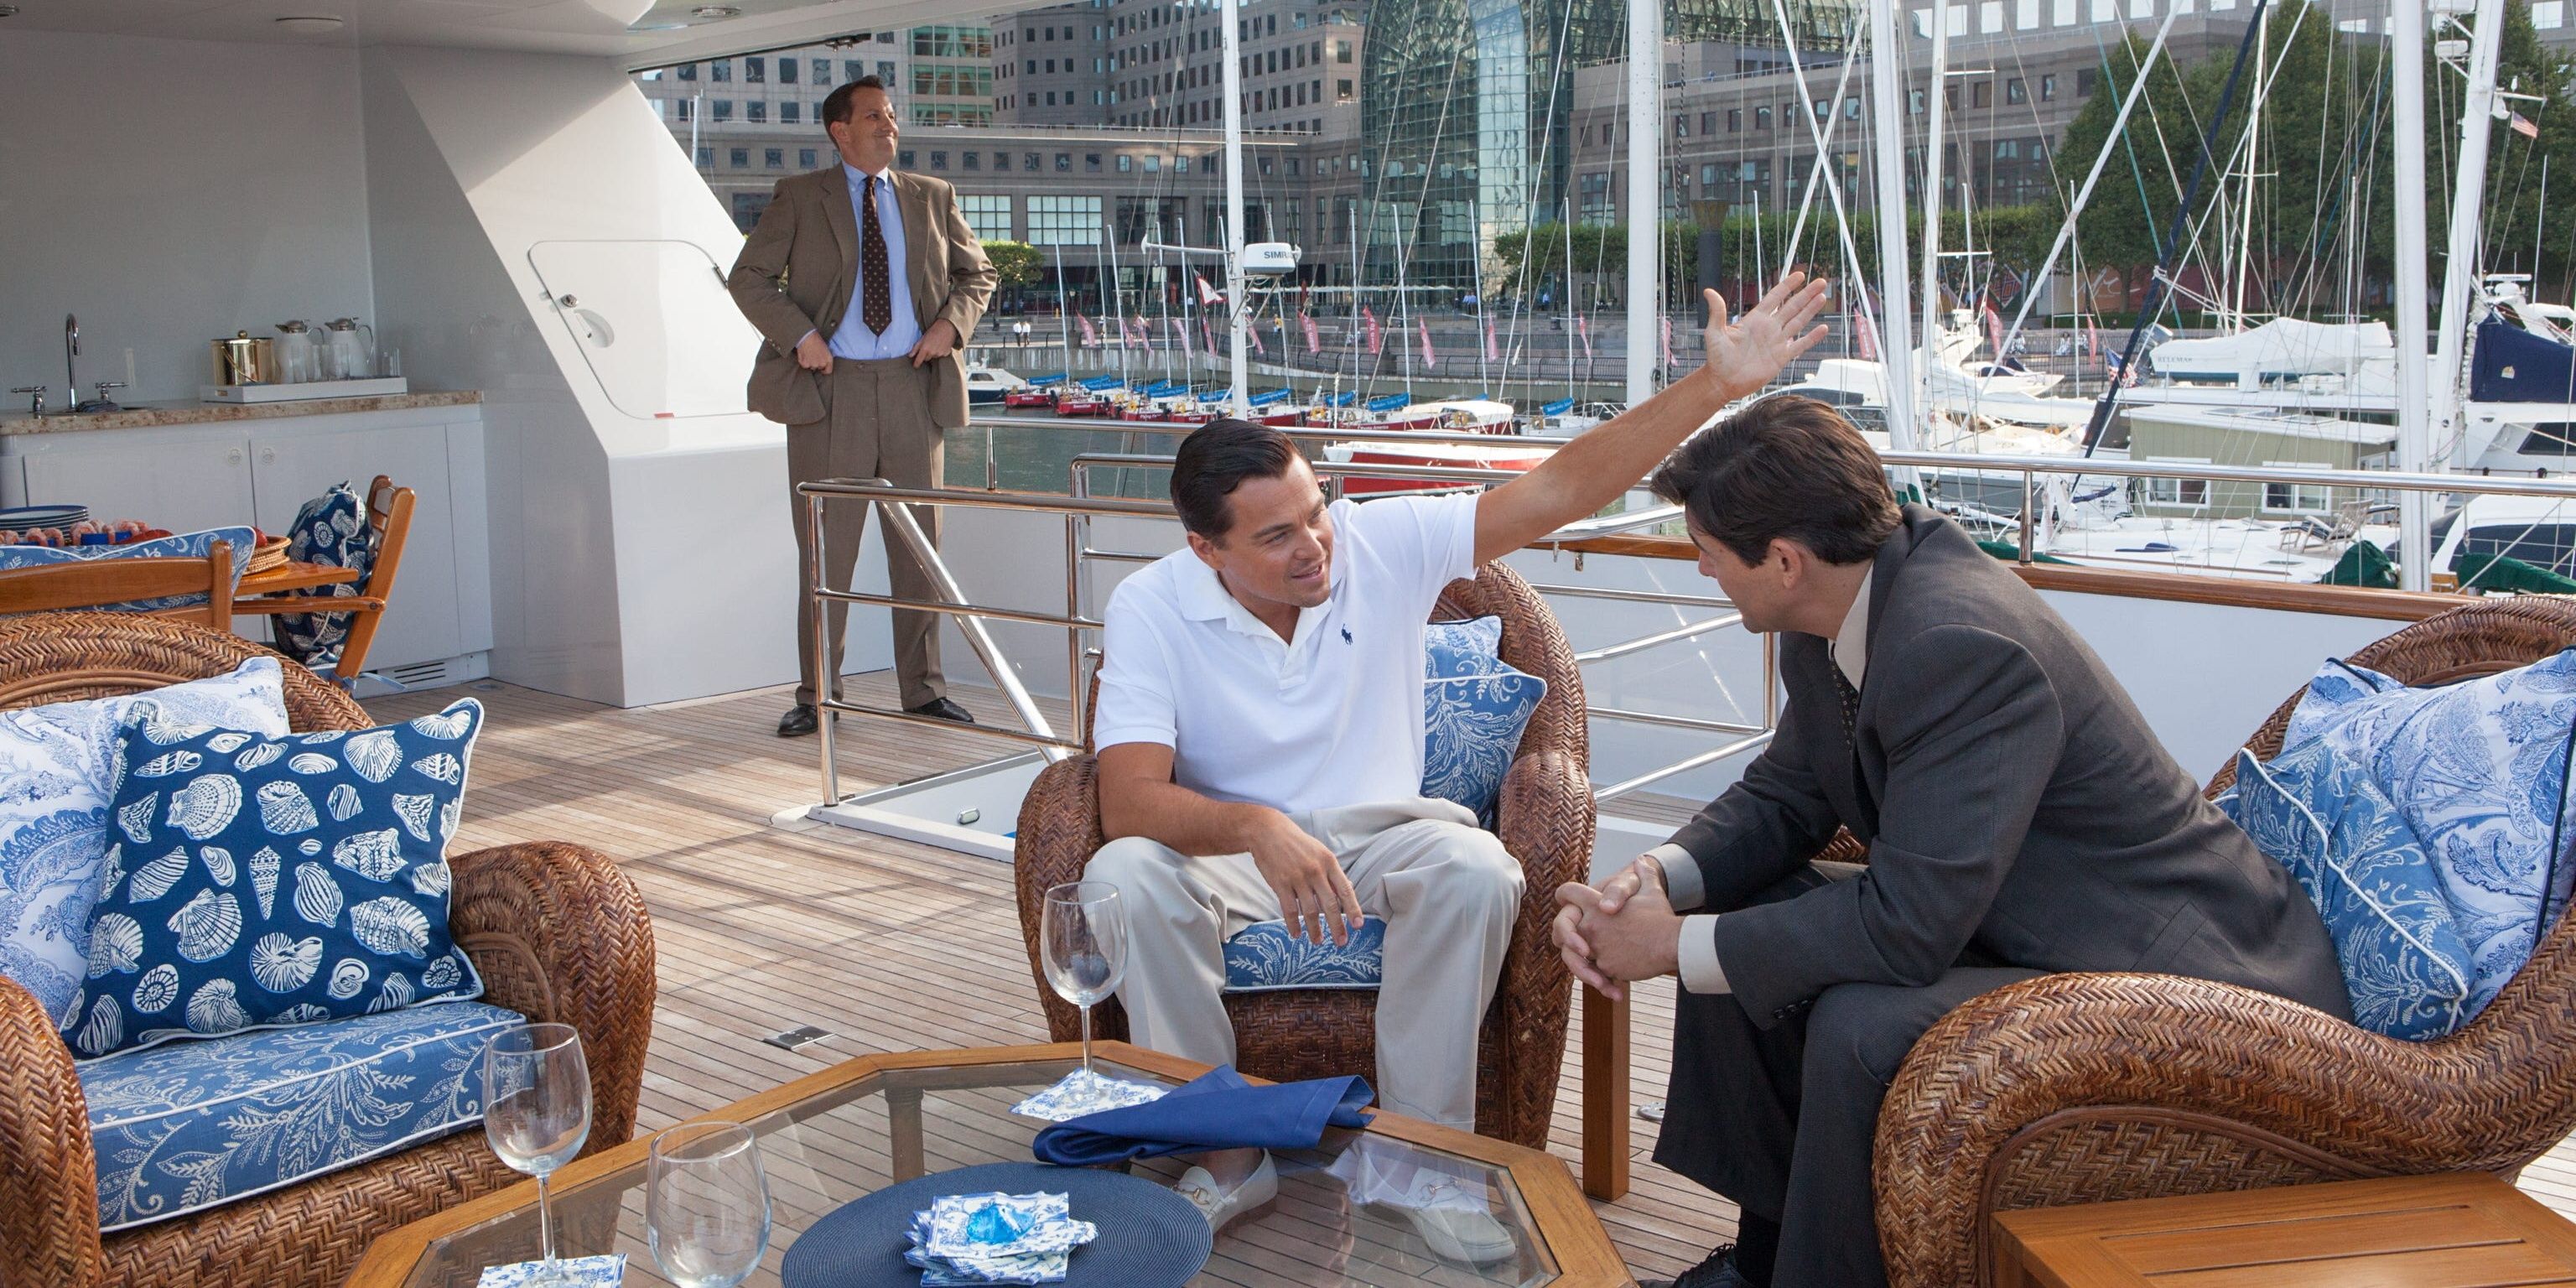 Jordan Belfort tries to bribe FBI agents on his yacht in The Wolf of Wall Street